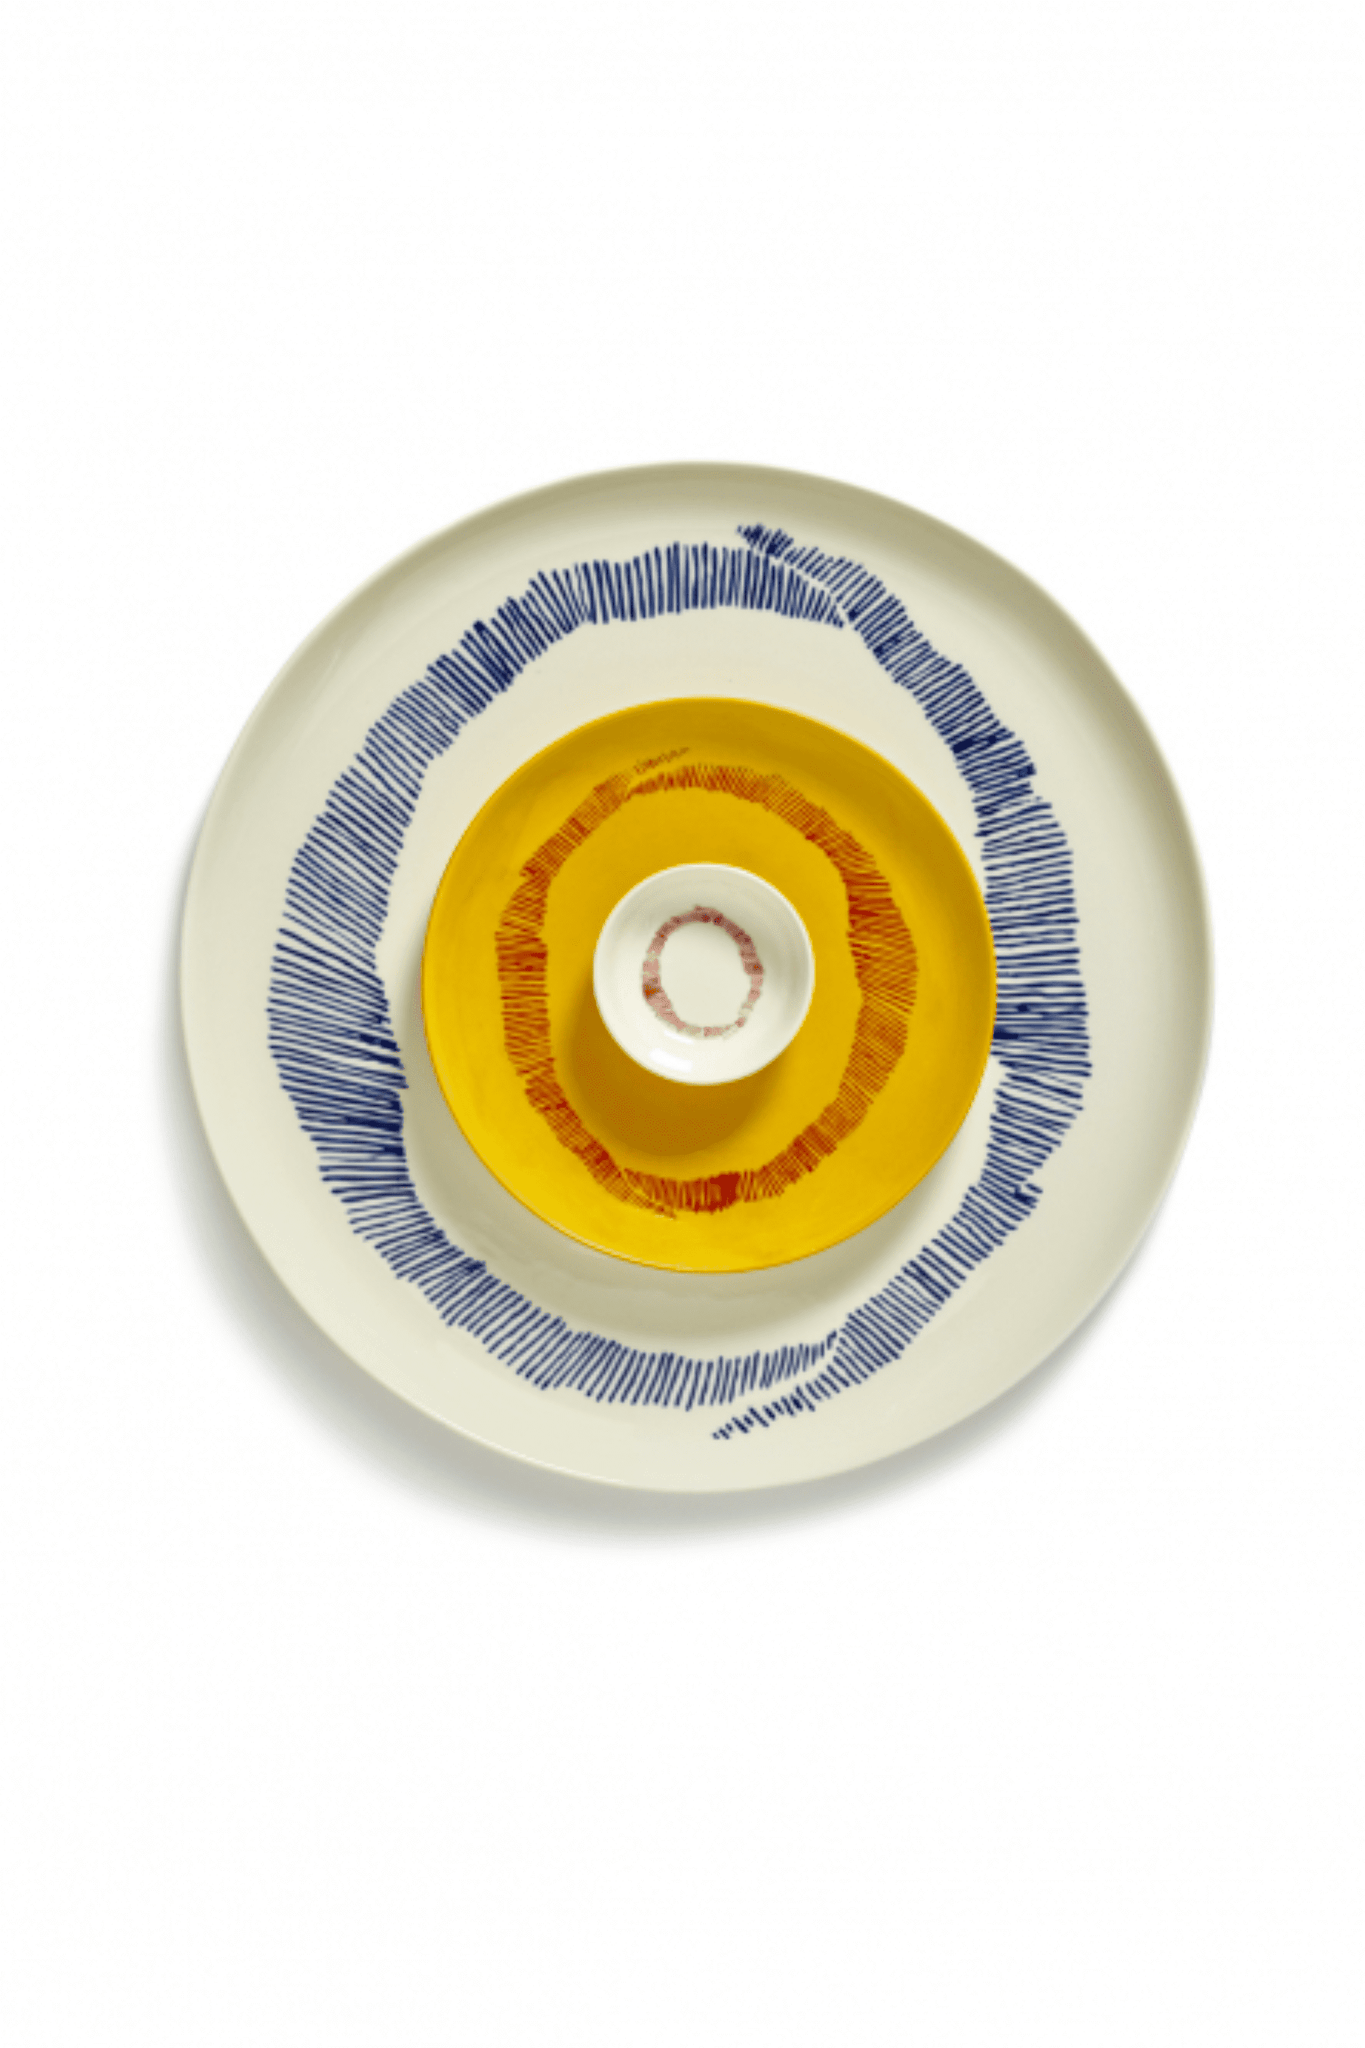 Serving Plate, White Swirl with Blue Stripes Ottolenghi Serax, shown stacked with bowl and dish